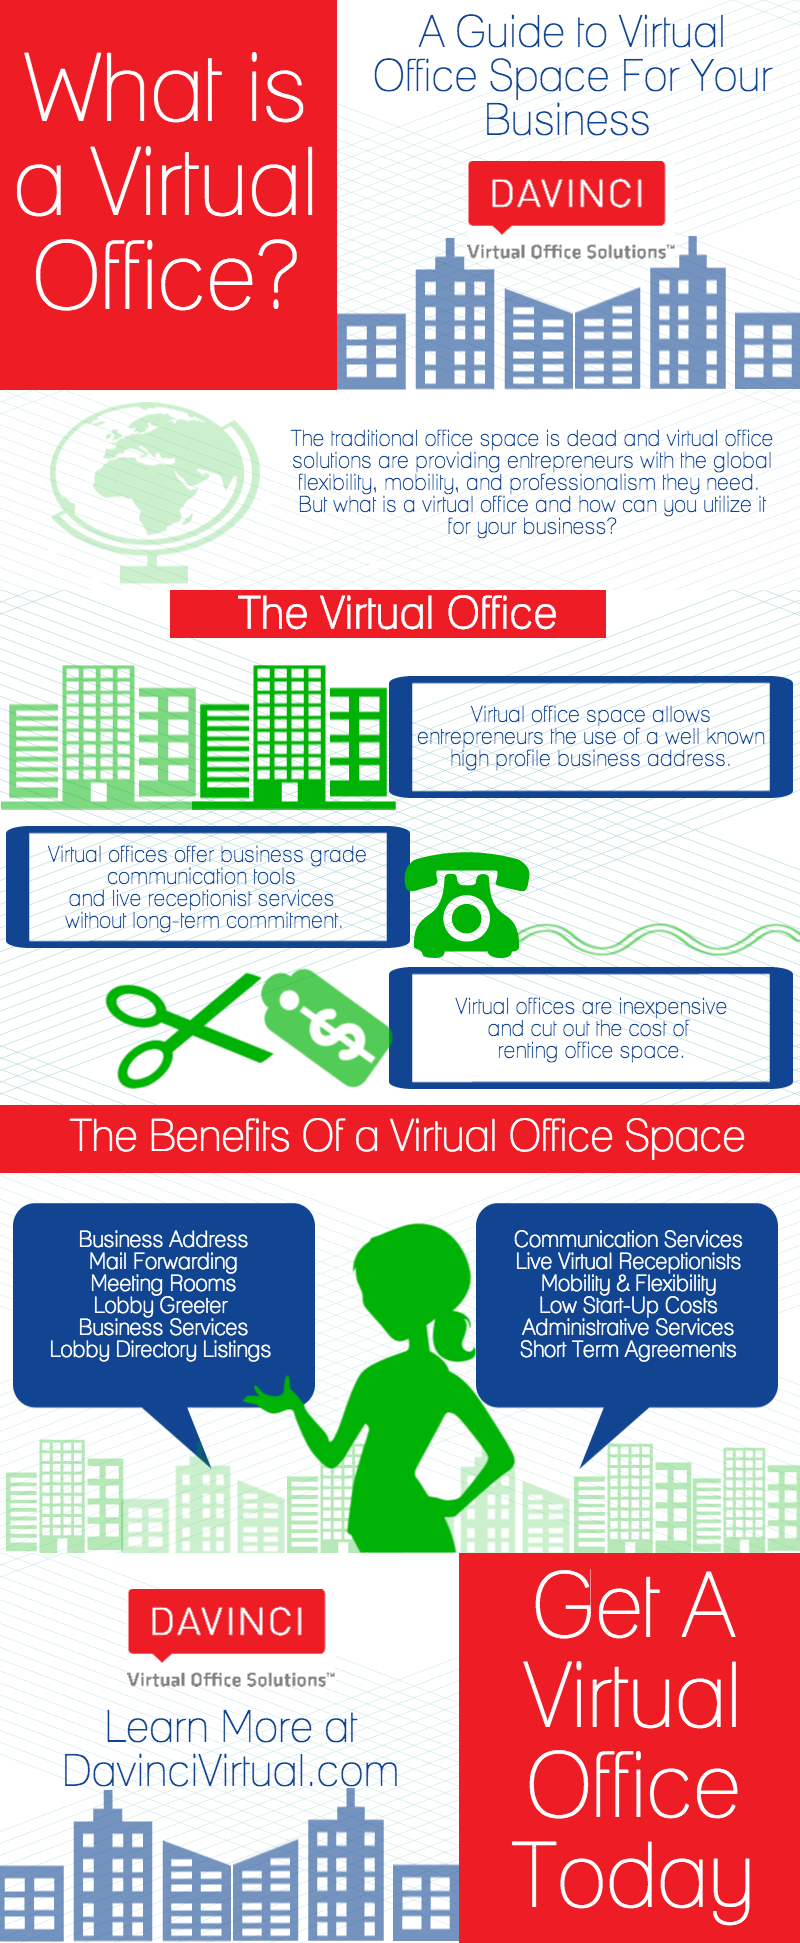 What is a Virtual Office